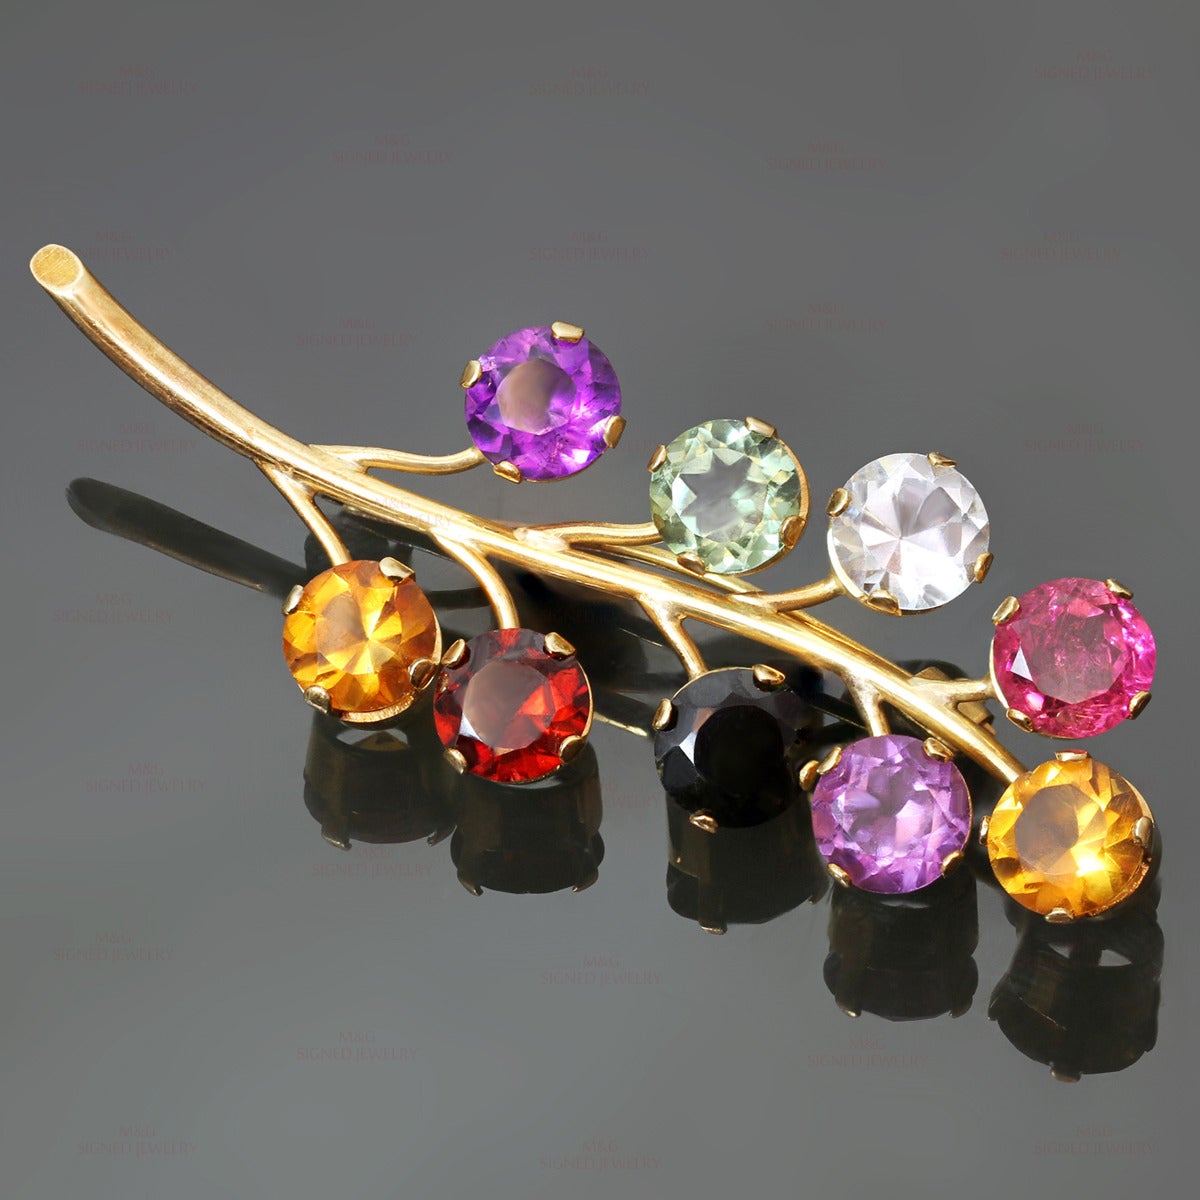 This stunning floral branch brooch is made in 18k yellow gold and prong-set with genuine faceted gemstones: amethyst, aquamarine, garnet, green tourmaline and pink tourmaline - weighing an estimated 11.5 carats. Made in United States circa 1980s.